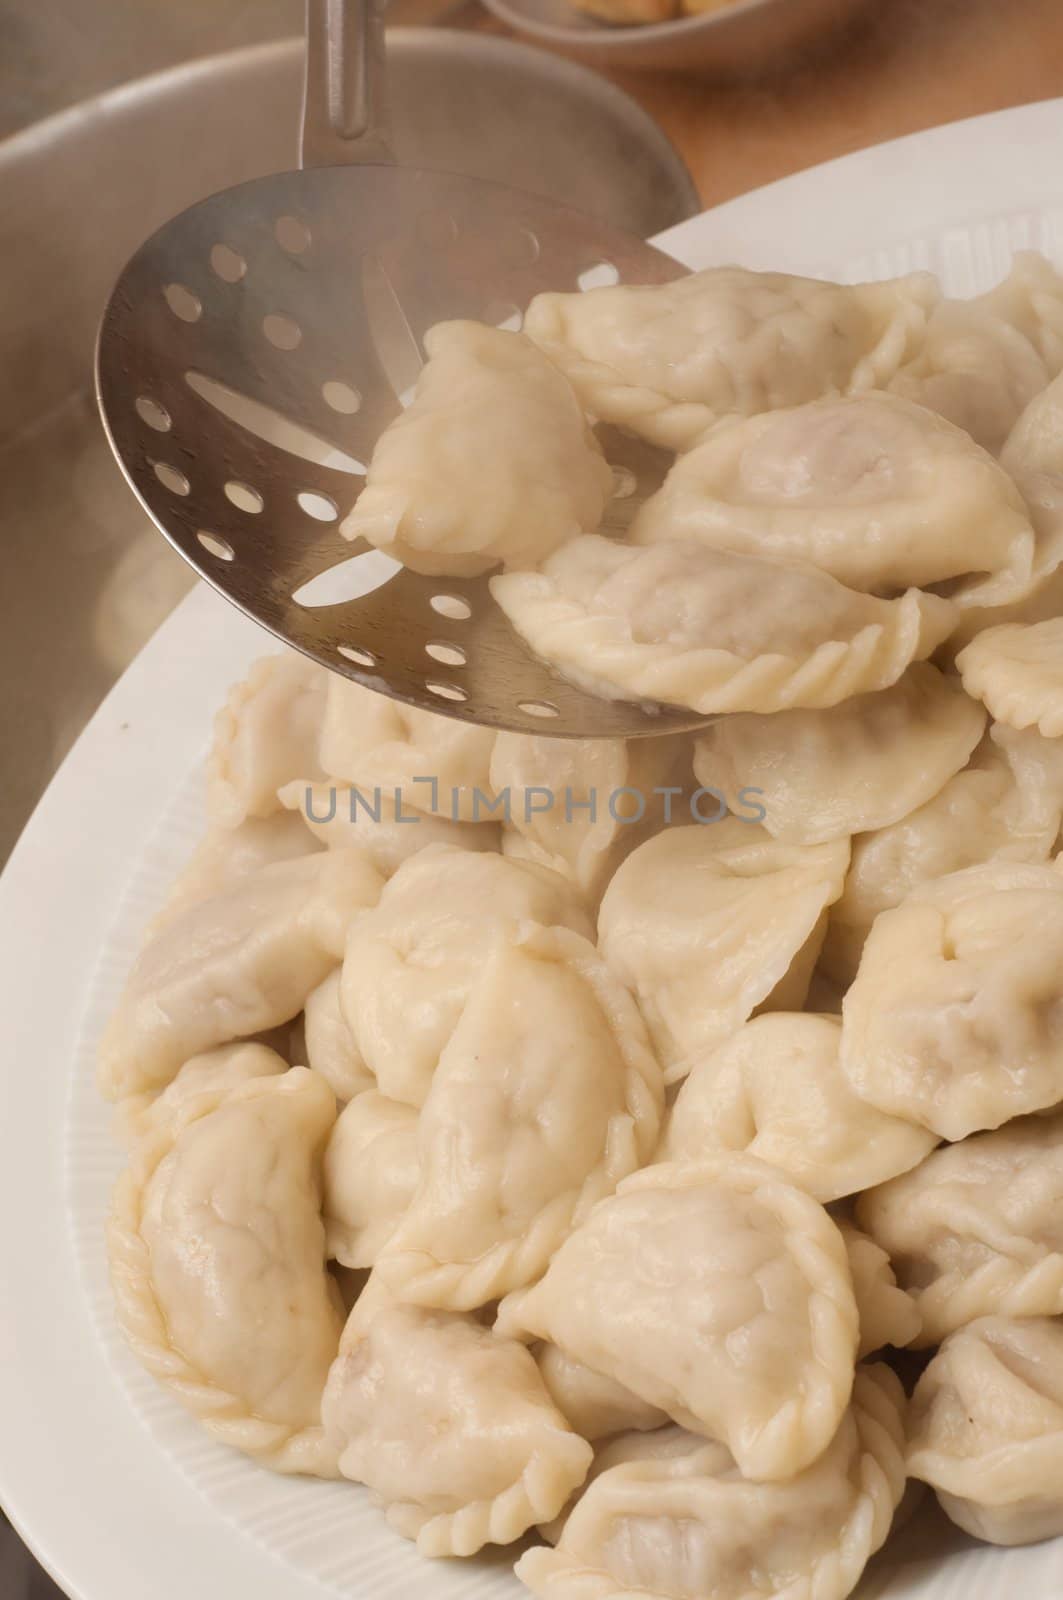 House pelmeni prepared and just from a pan